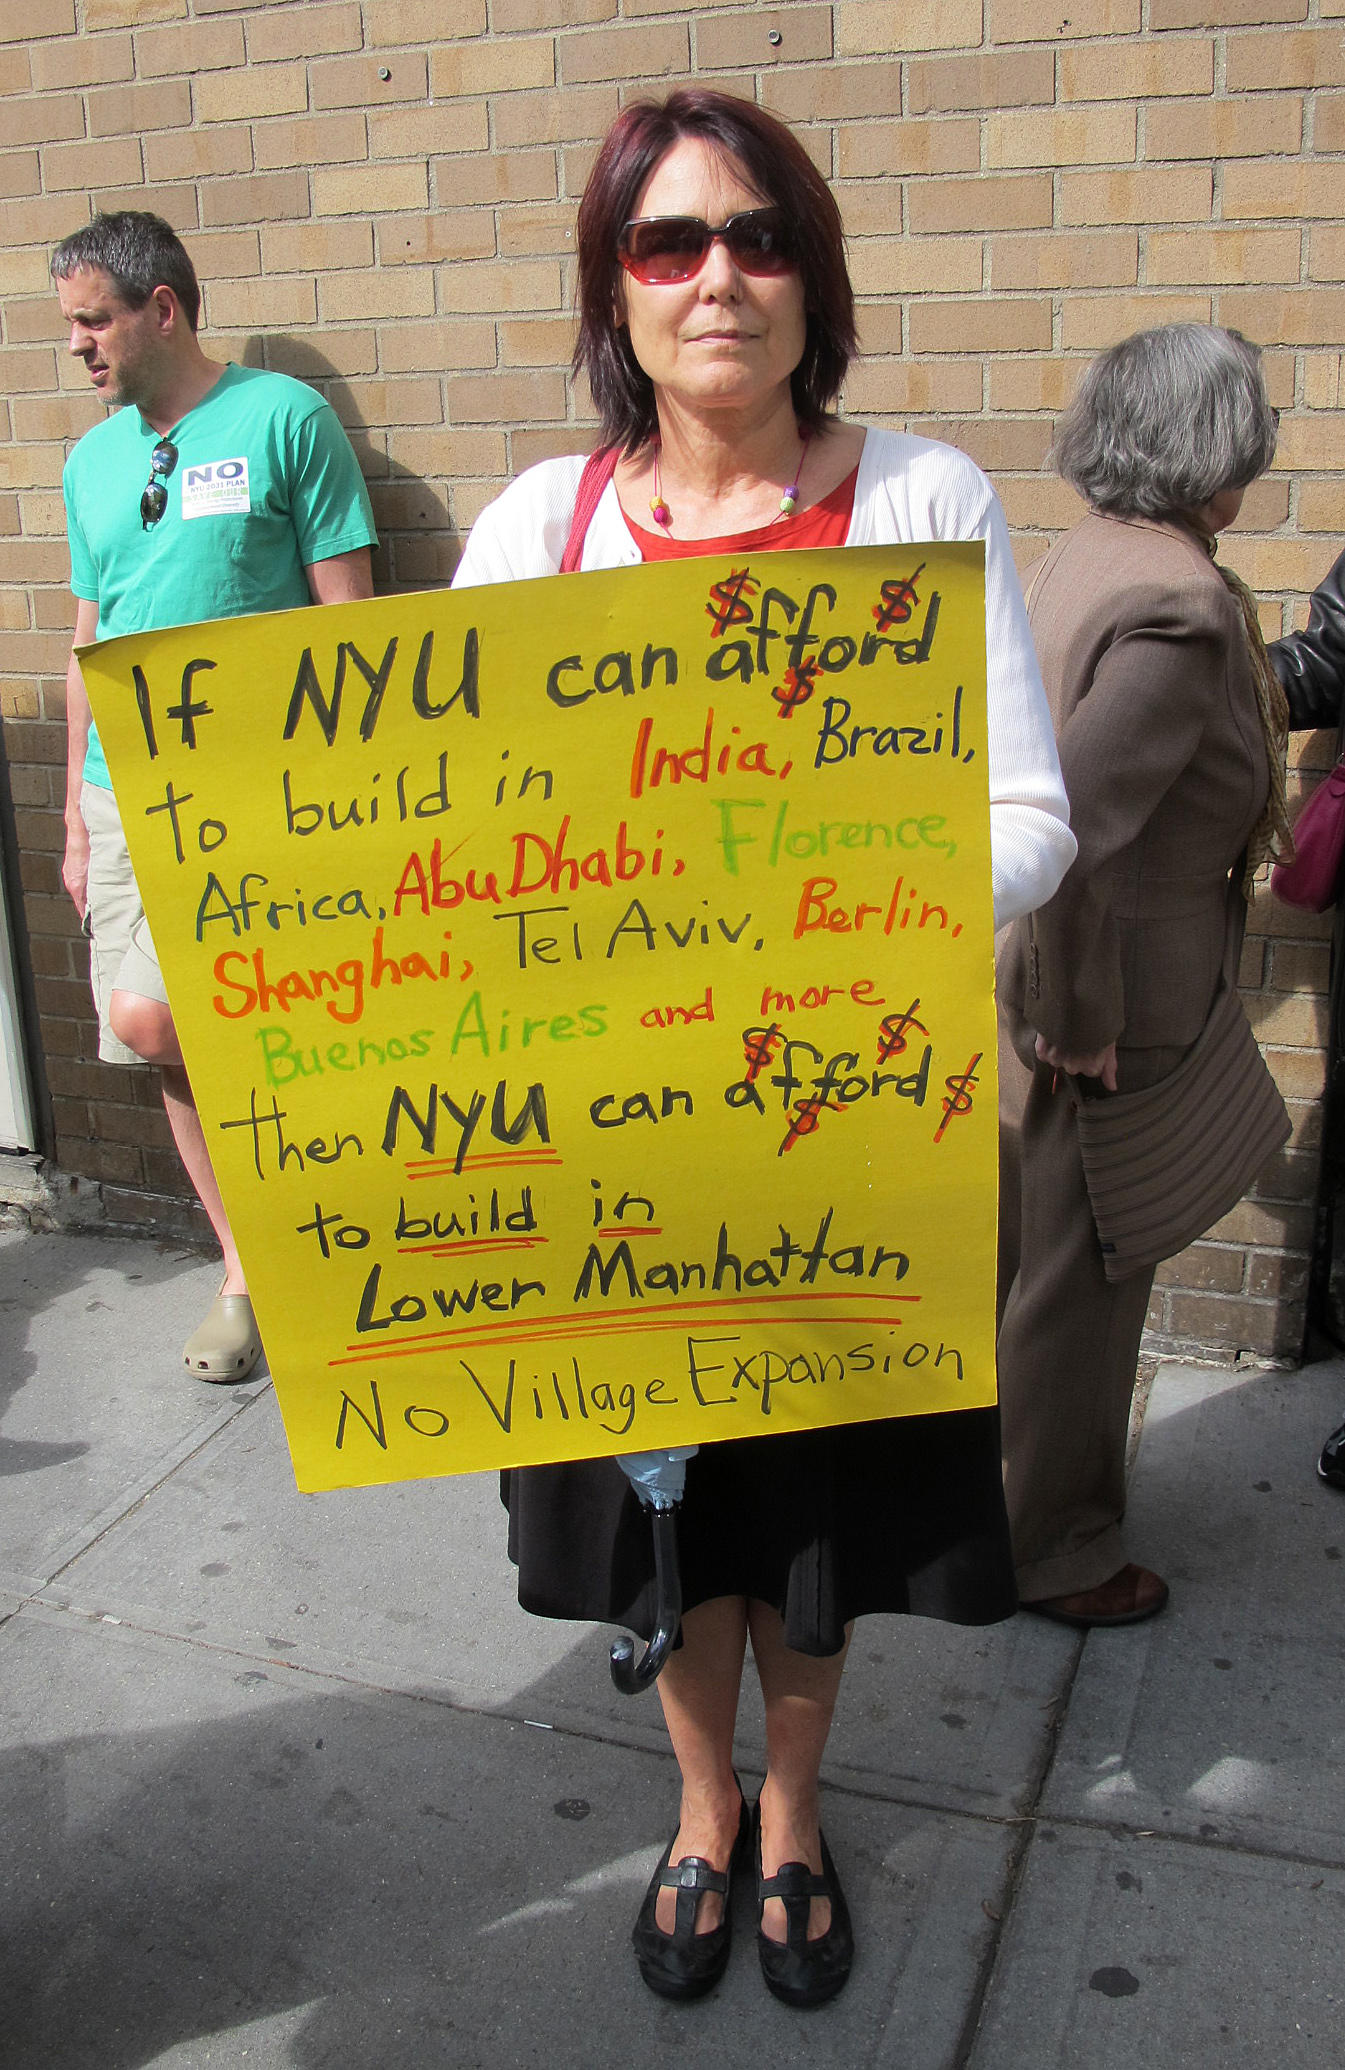 Protest Marcher Against the NYU2031 (De)Construction Plan and Movement